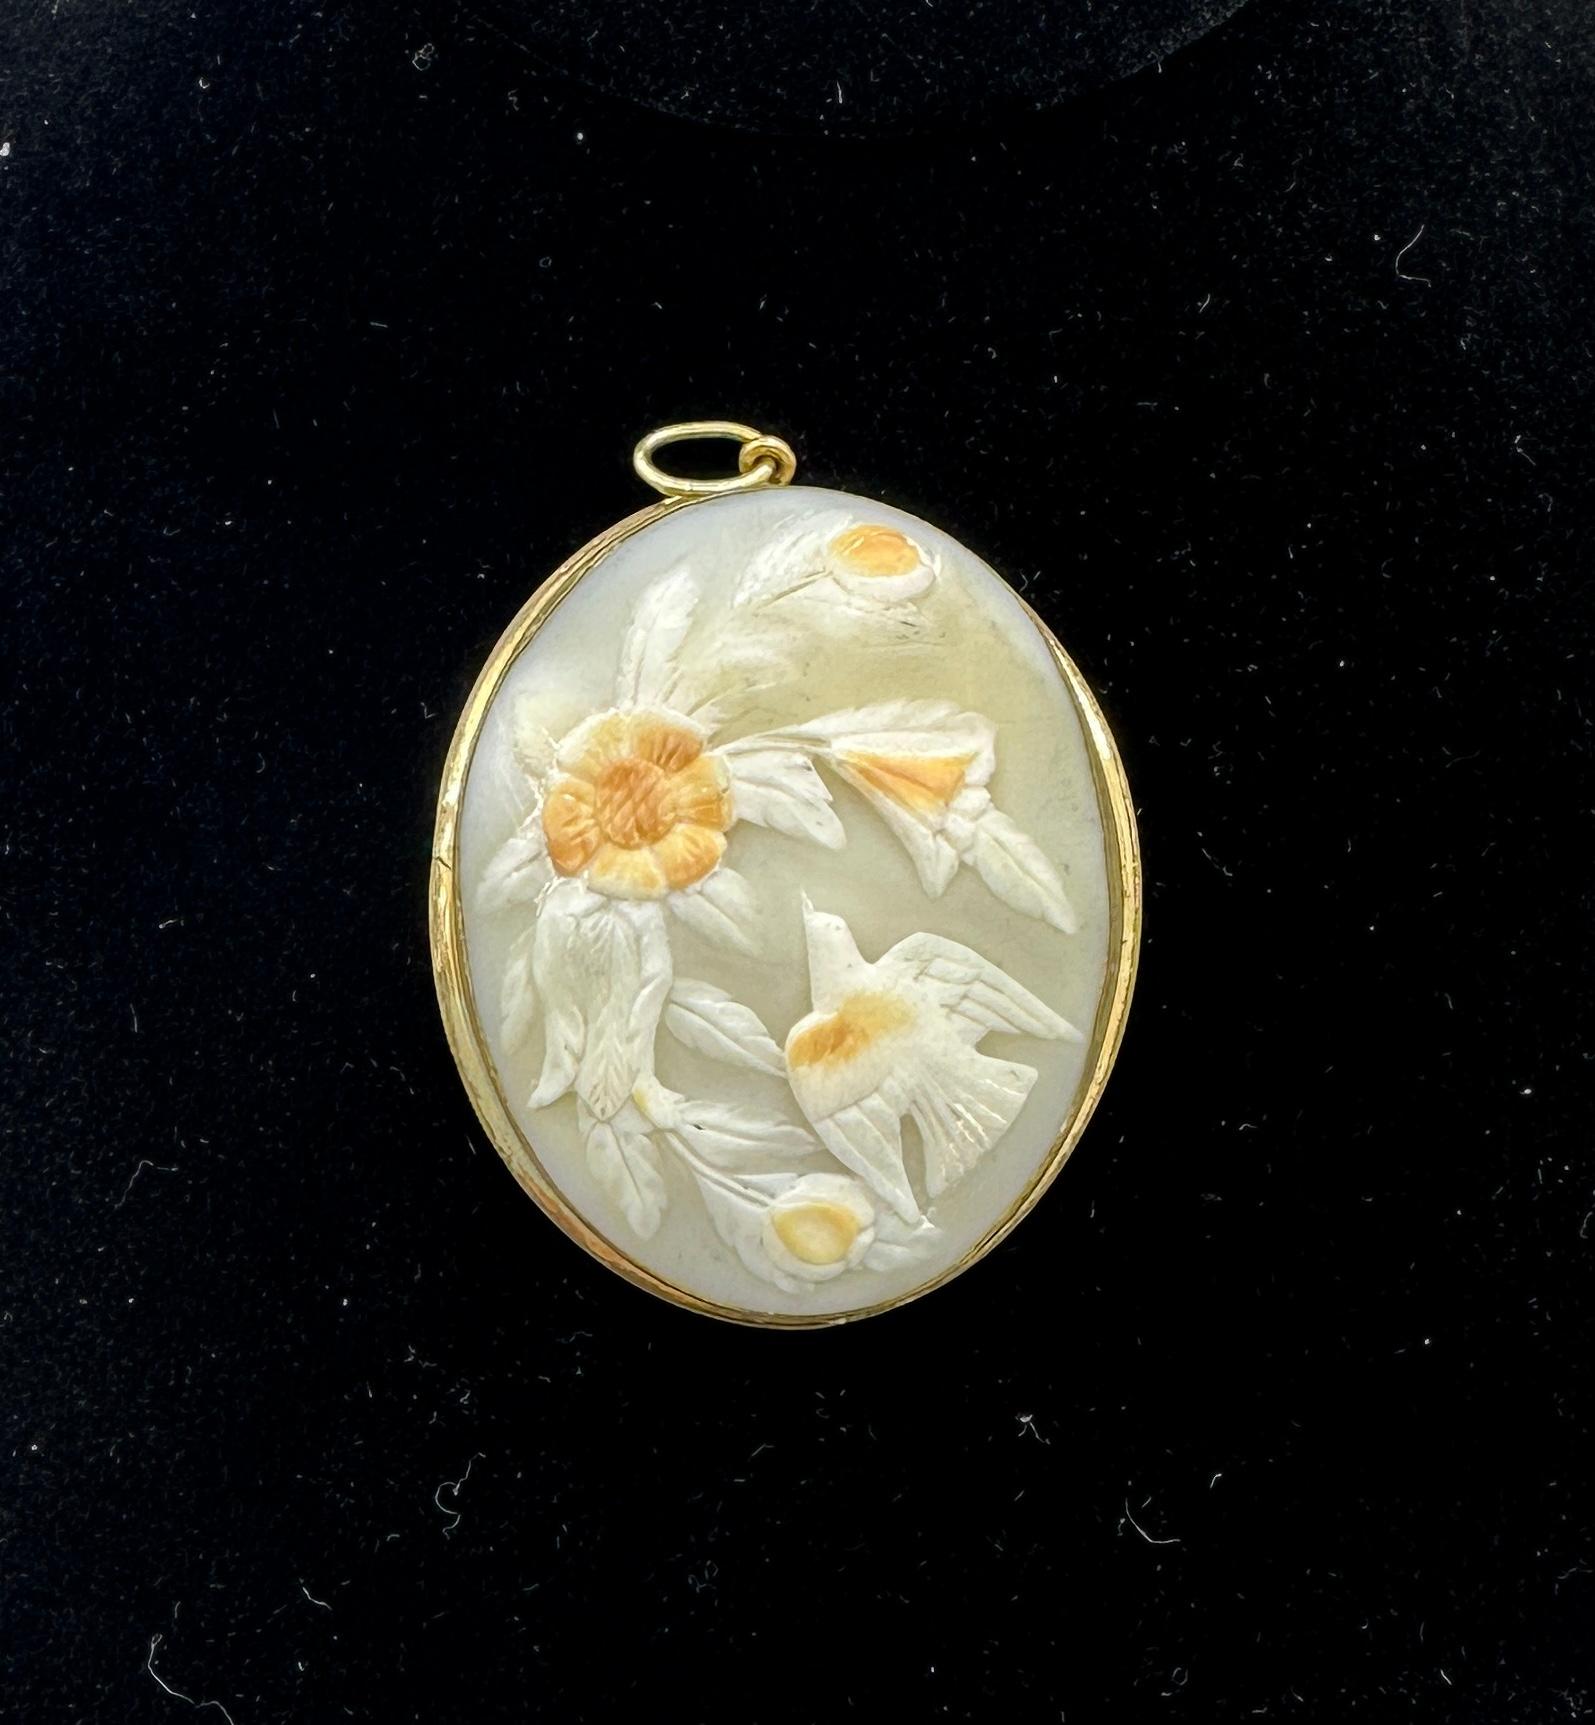 This is an absolutely stunning and very rare antique Victorian Cameo Pendant with a high relief carving of a Dove Bird flying towards a stunning Flower Bouquet of extraordinary beauty.  The Cameo is the work of a master artisan and the motif with